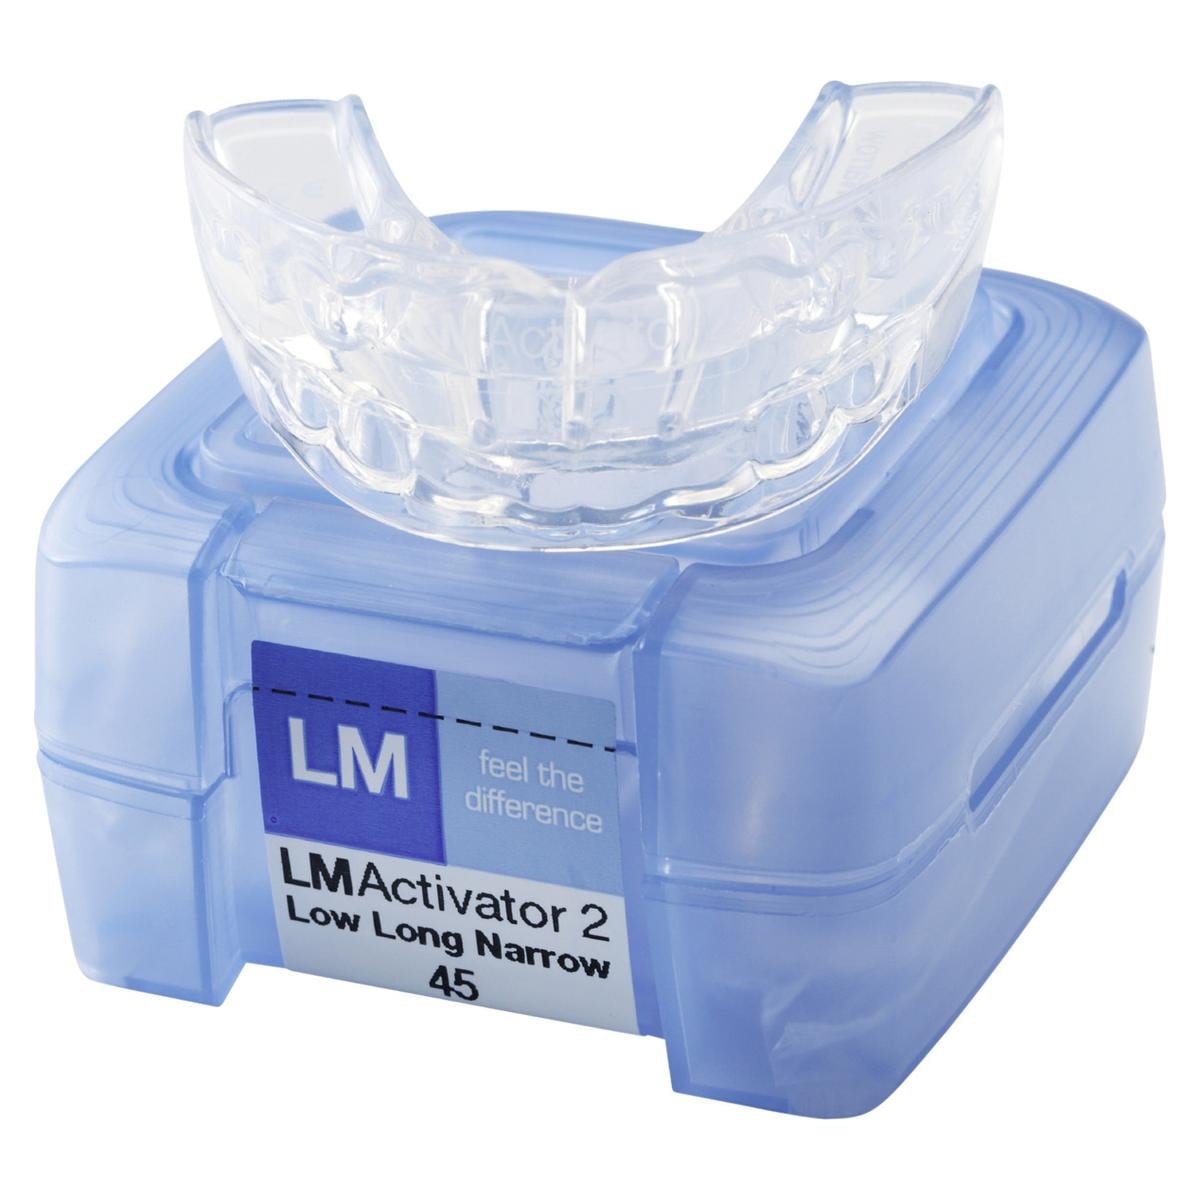 LM Activator 2 Low Long - Narrow - Size 60 (94260LLN)